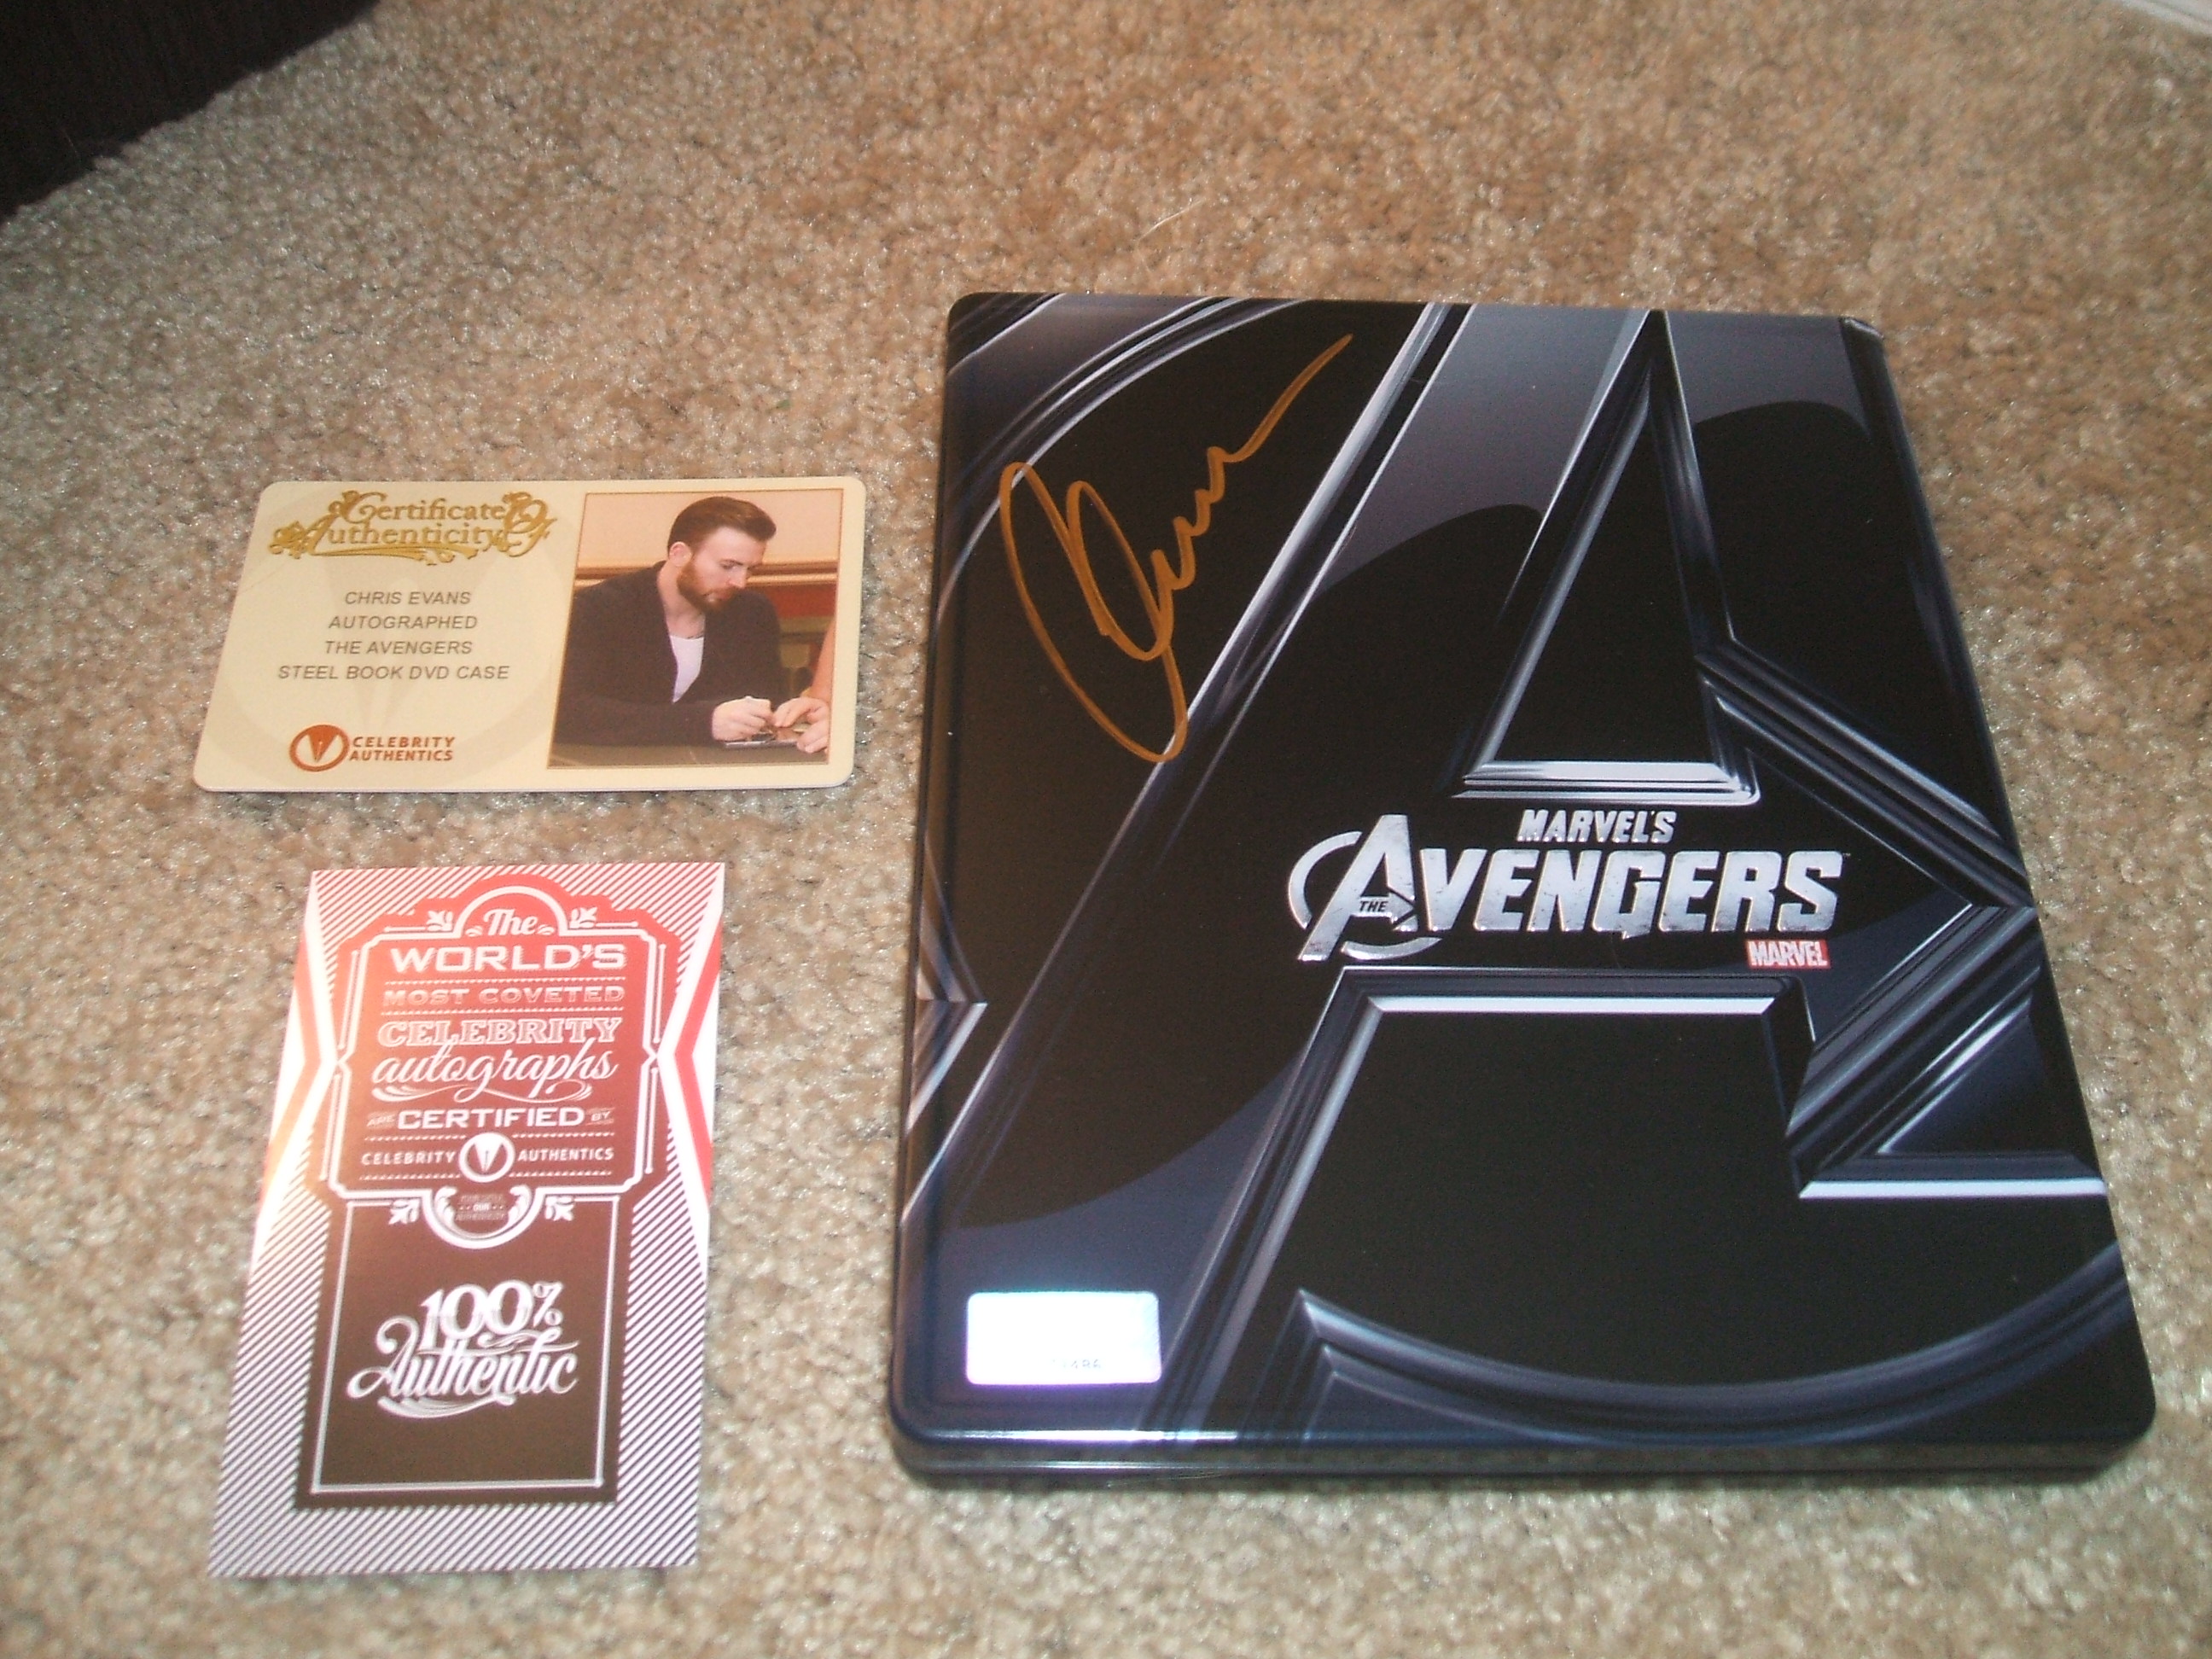 Avengers signed by Chris Evans